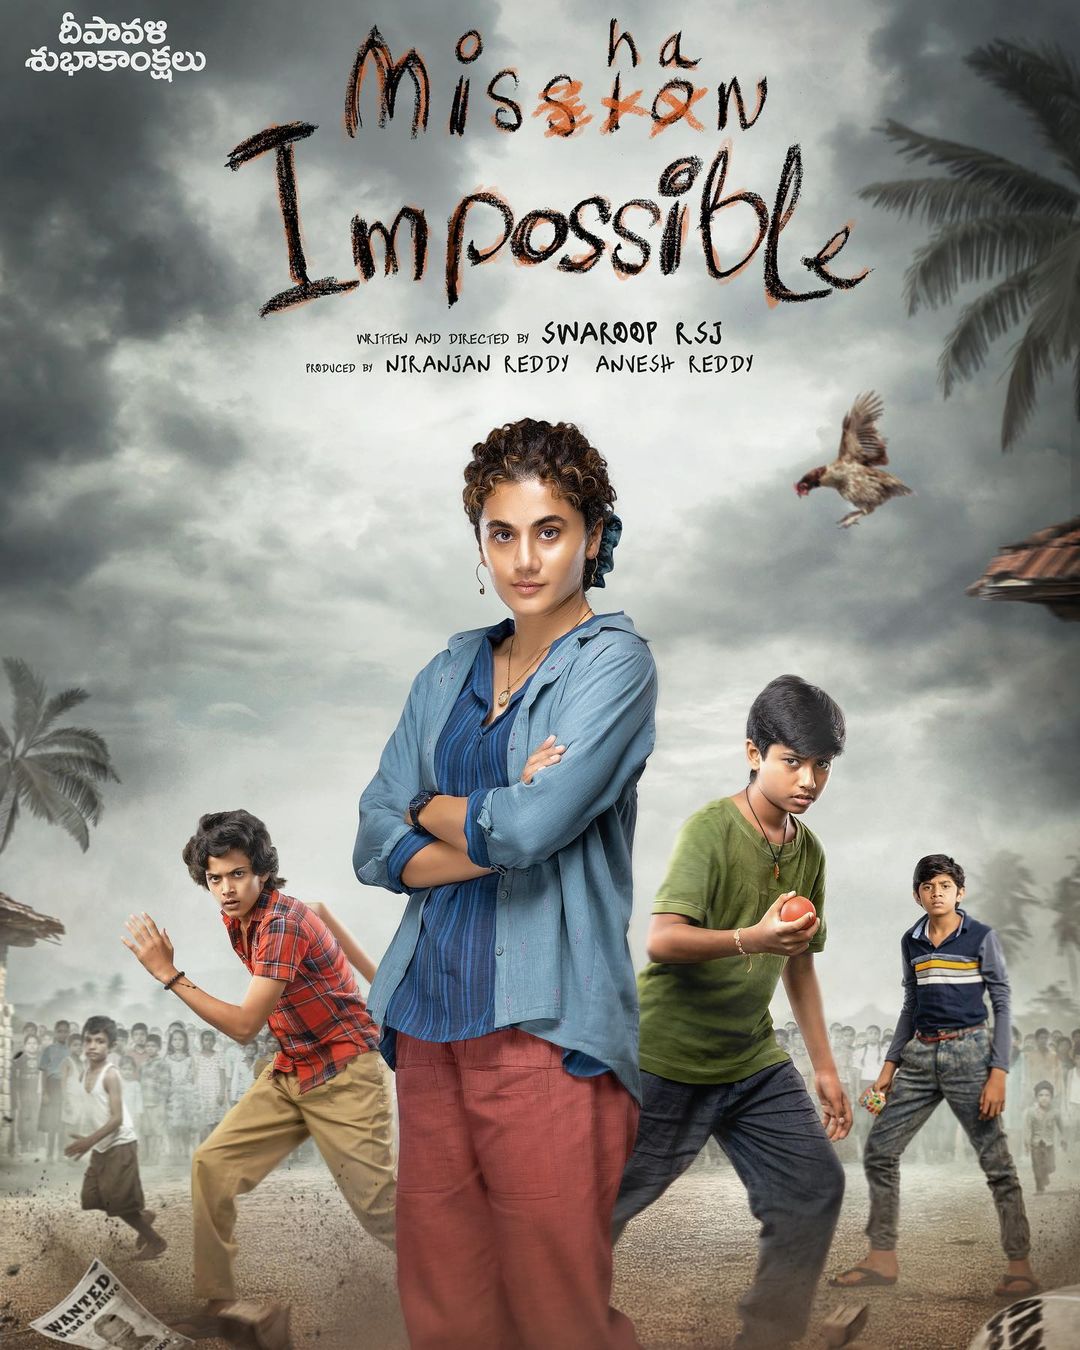 Mishan Impossible (2022)